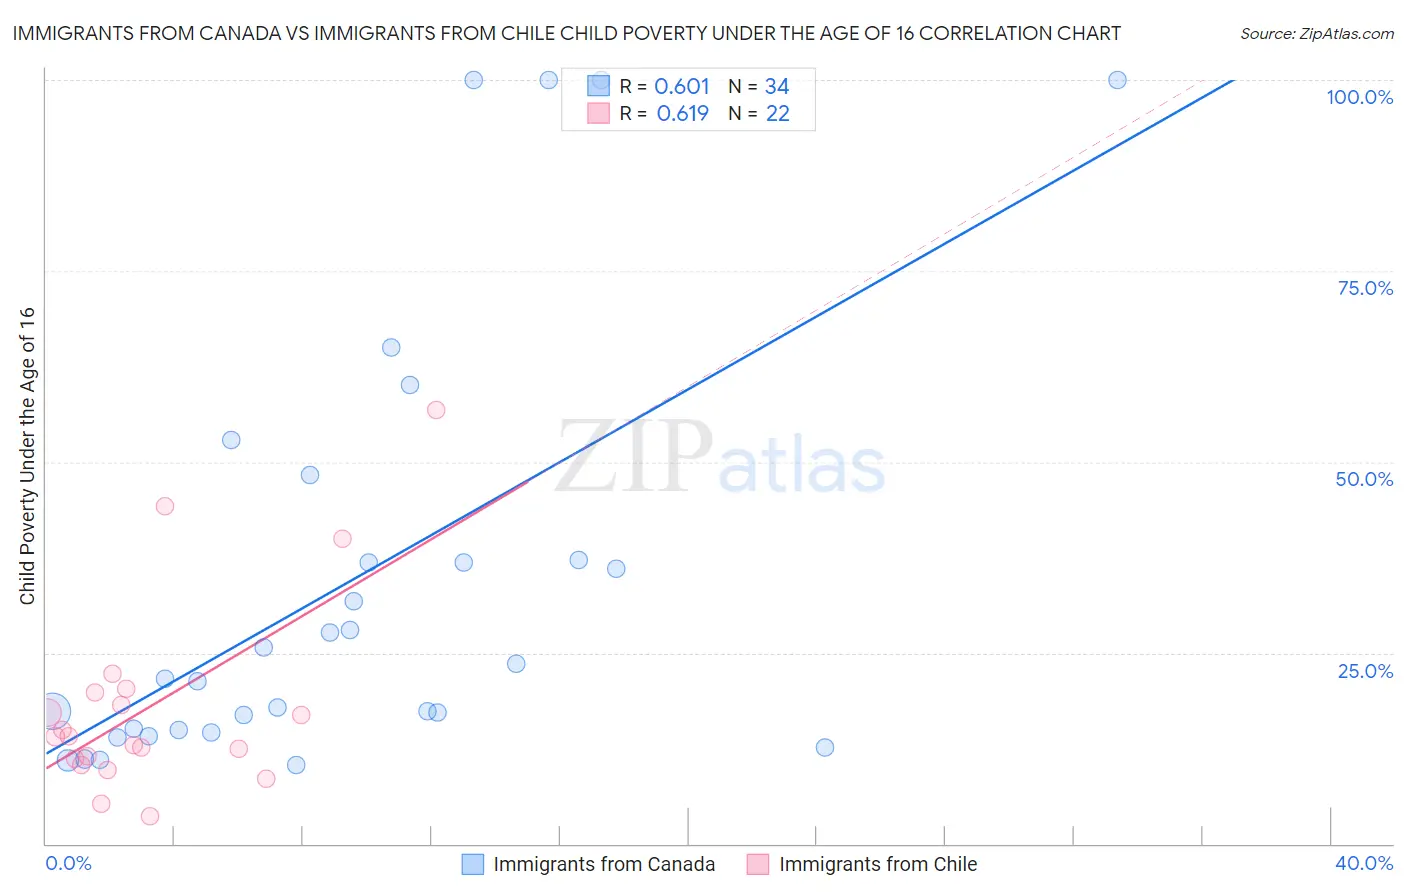 Immigrants from Canada vs Immigrants from Chile Child Poverty Under the Age of 16